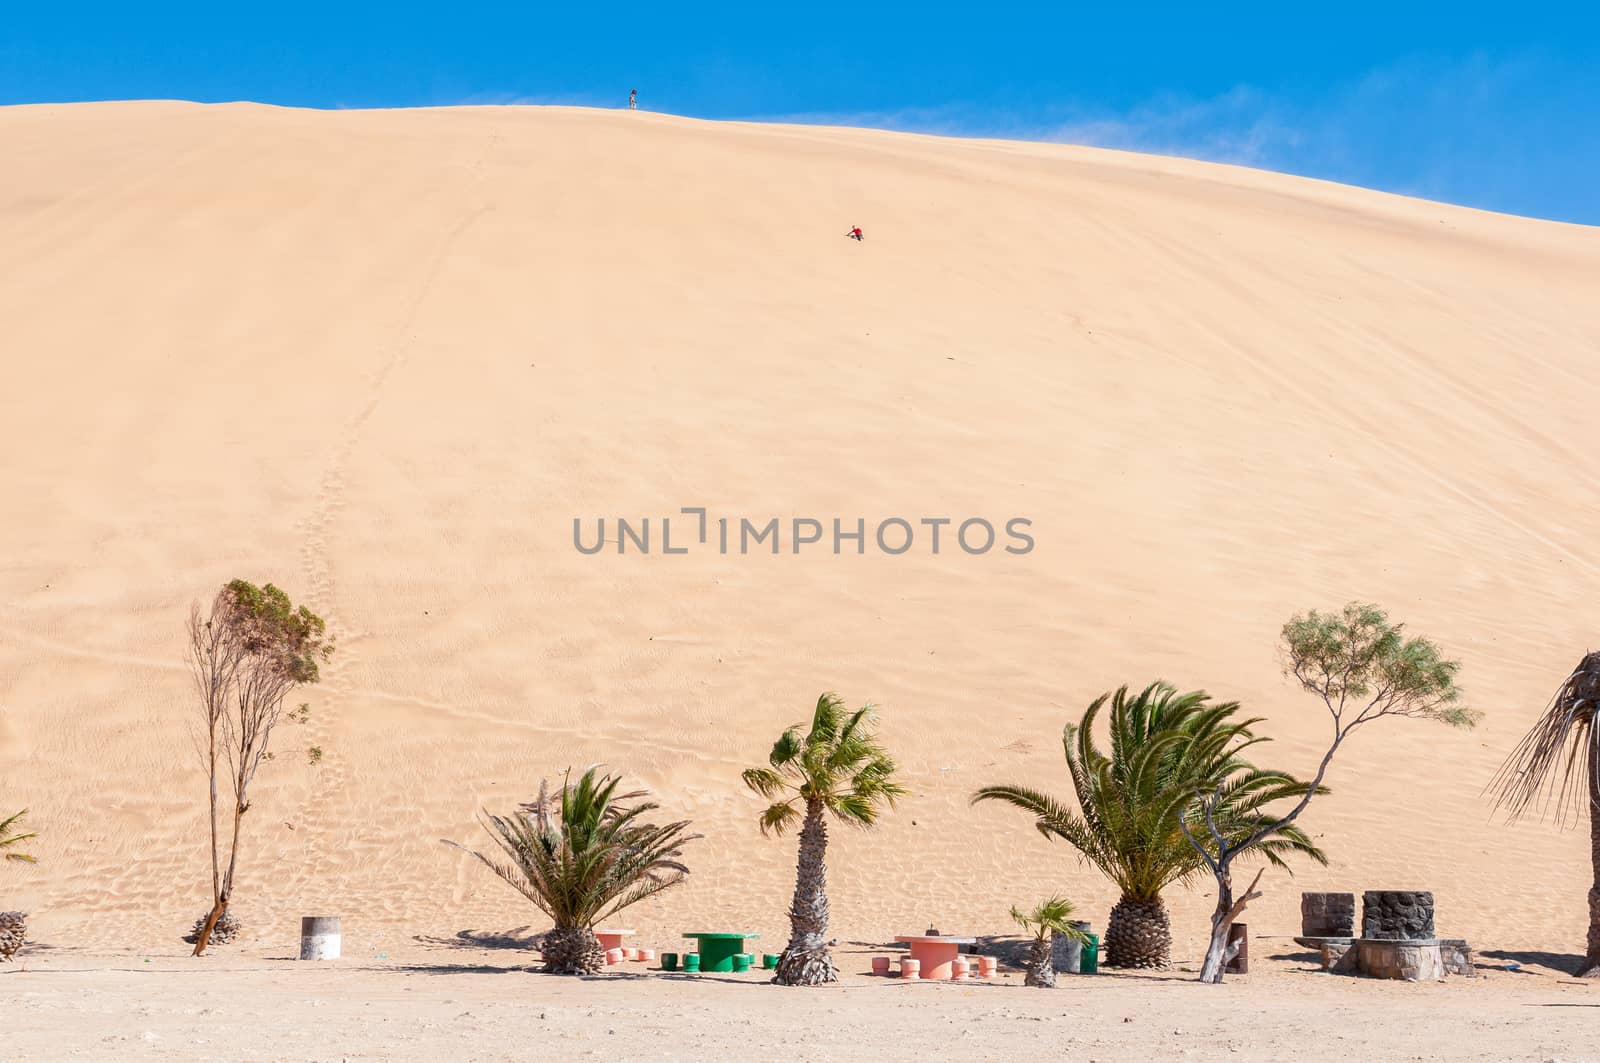 People are visible on Dune 7 at Walvis Bay on the Atlantic Ocean coast of Namibia